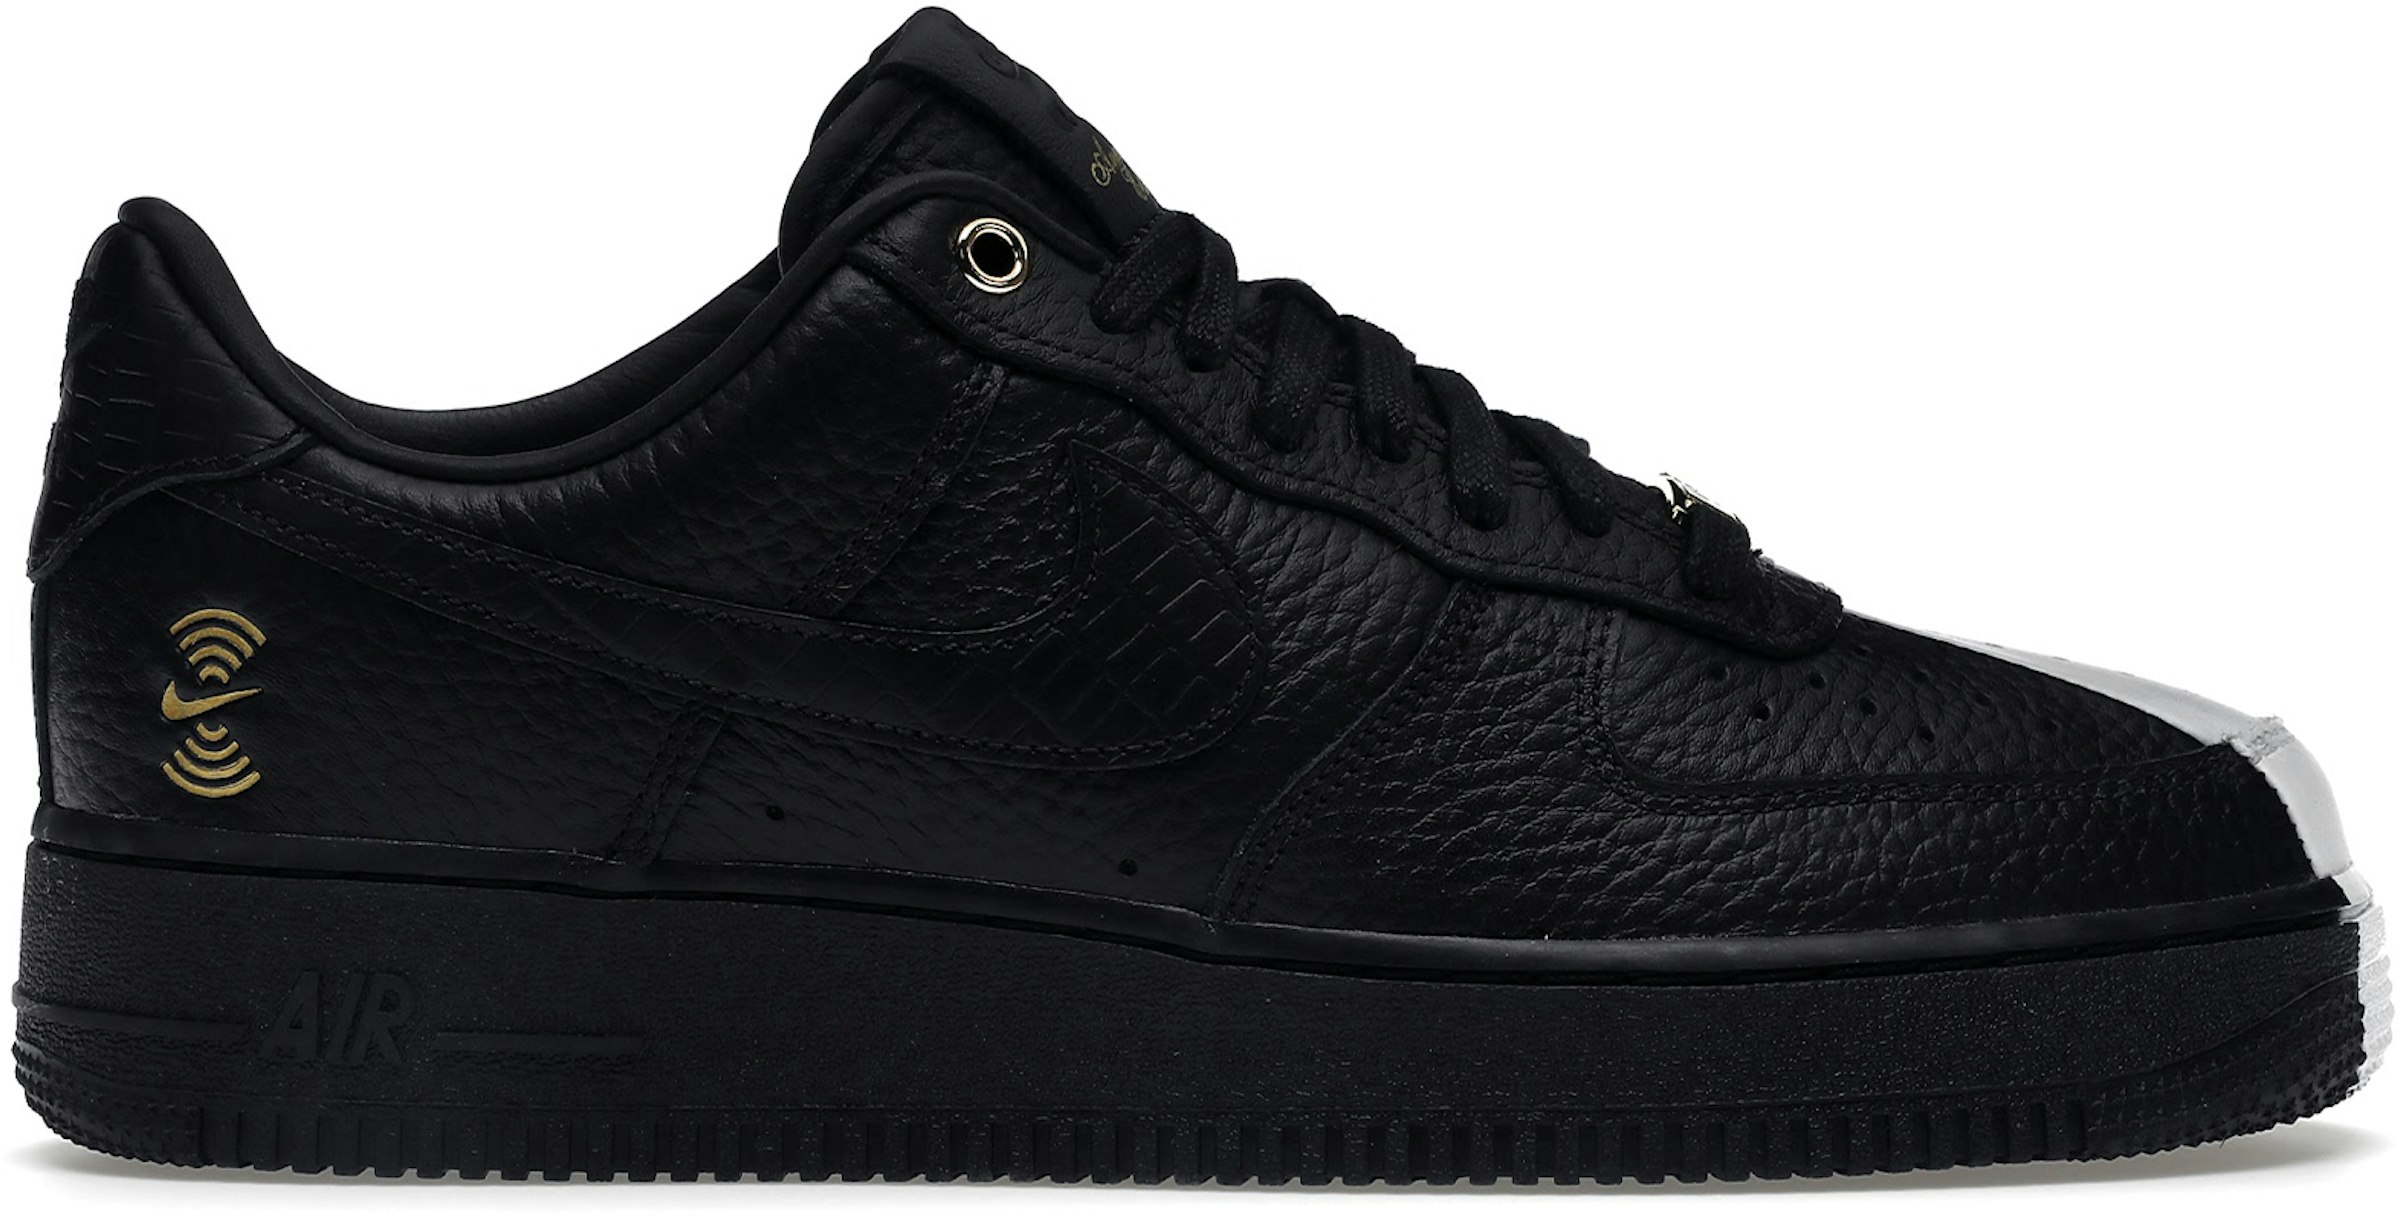 Credencial tempo Subir Nike Air Force 1 Low 40th Anniversary Edition Split Black White Men's -  DX6034-001 - US